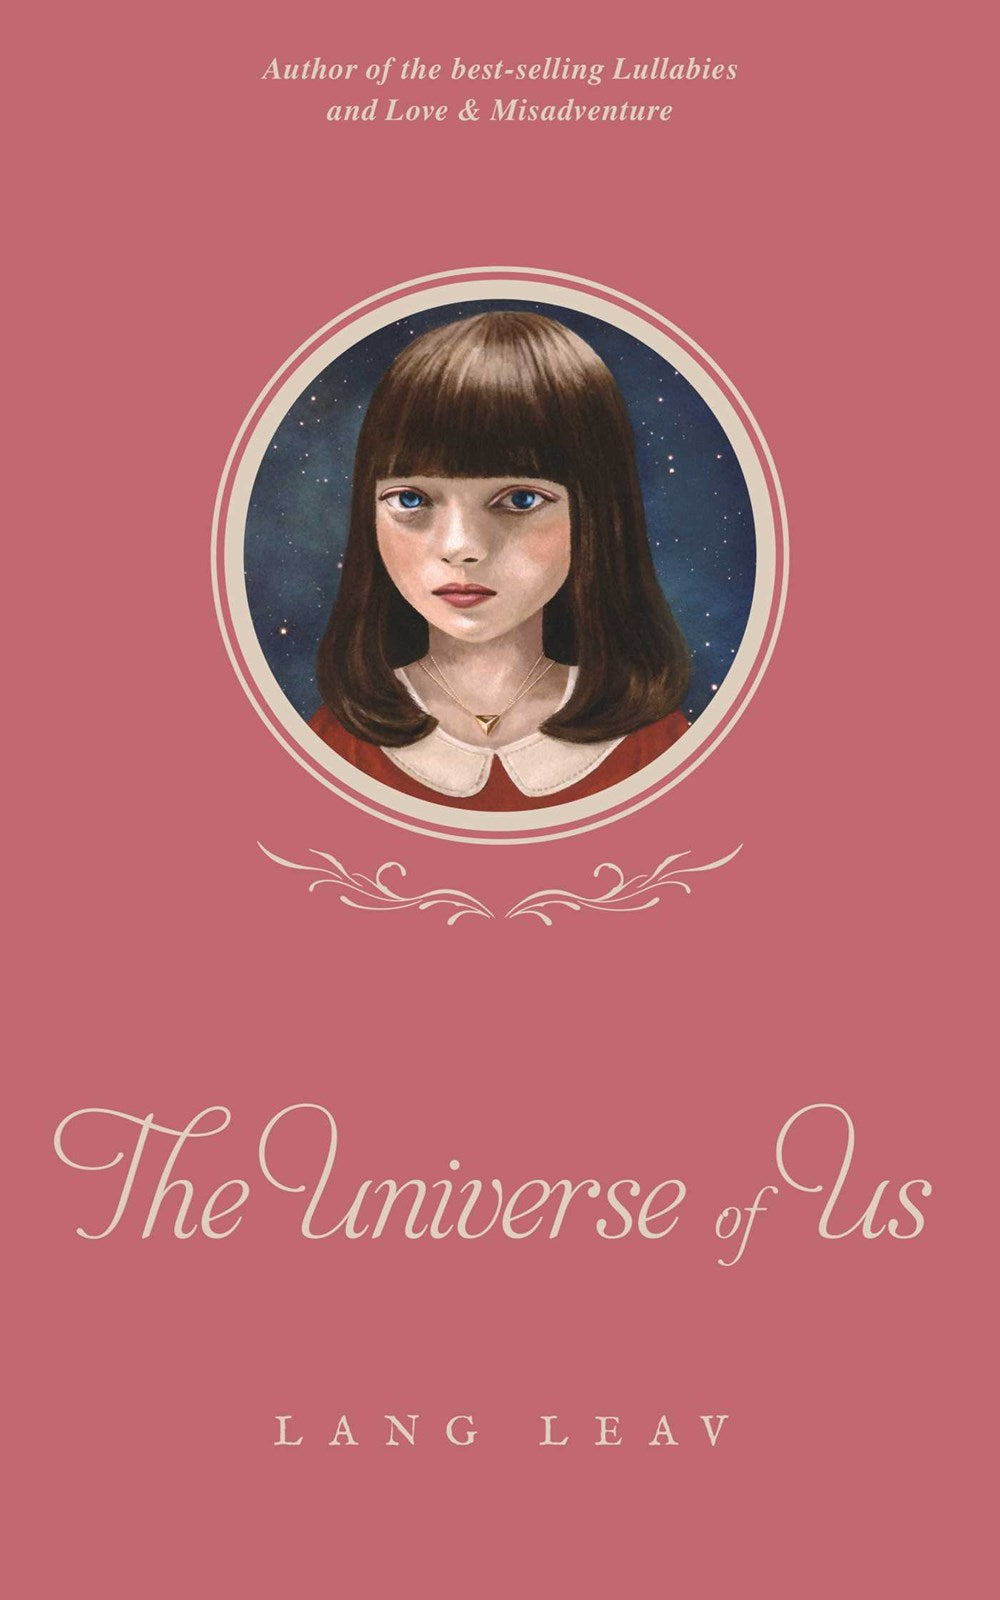 The Universe of Us  (Lang Leav)